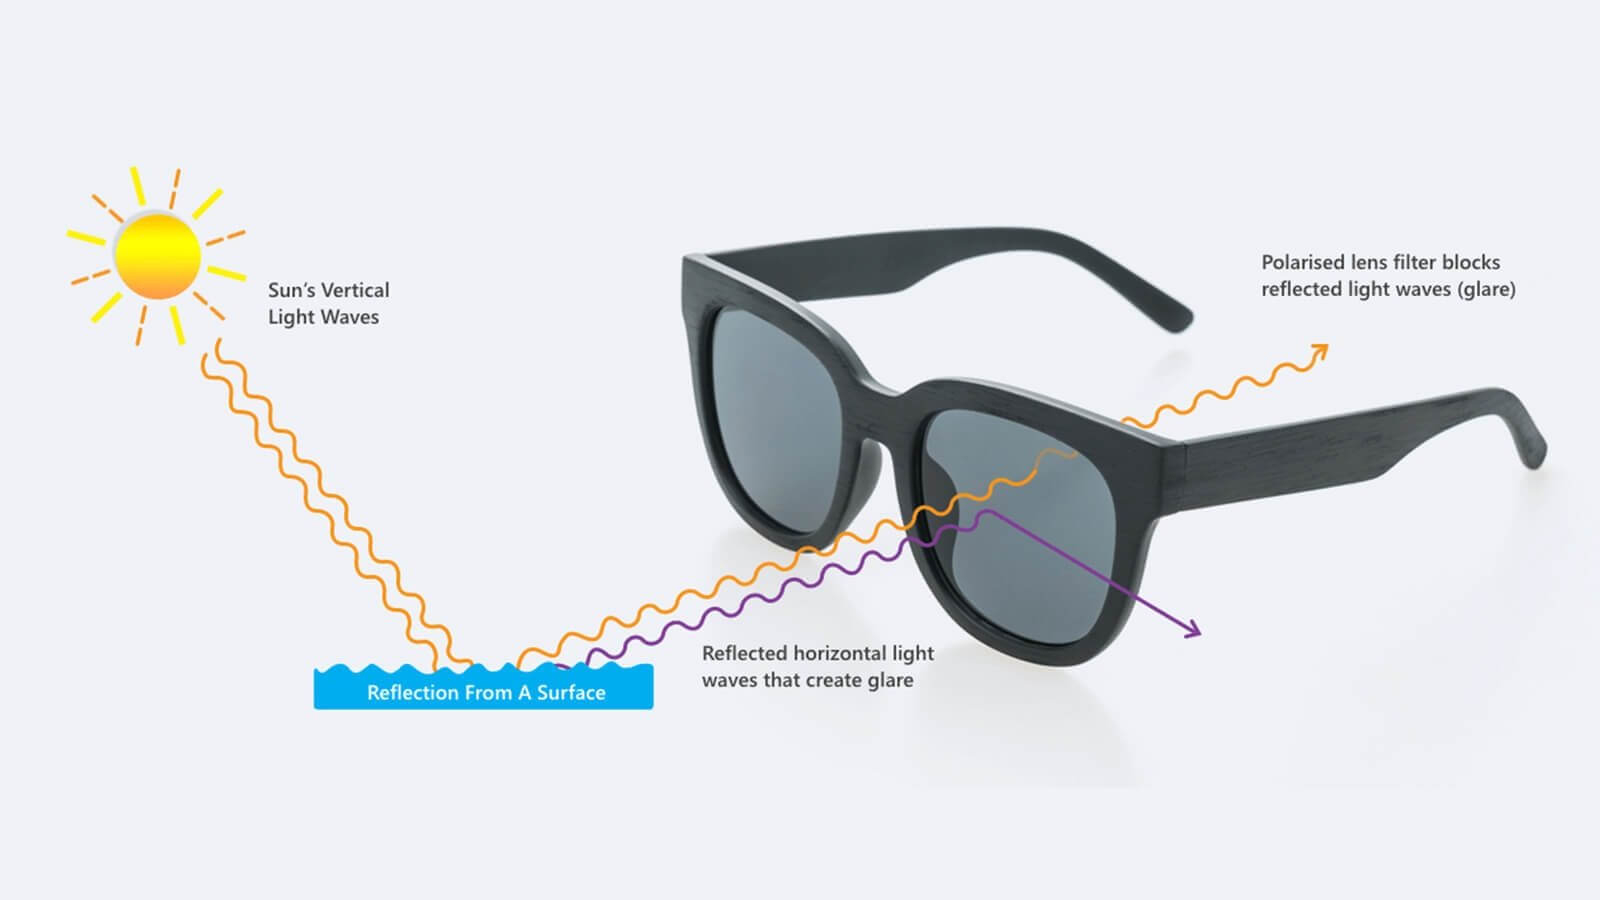 Polarised lenses: What and Why